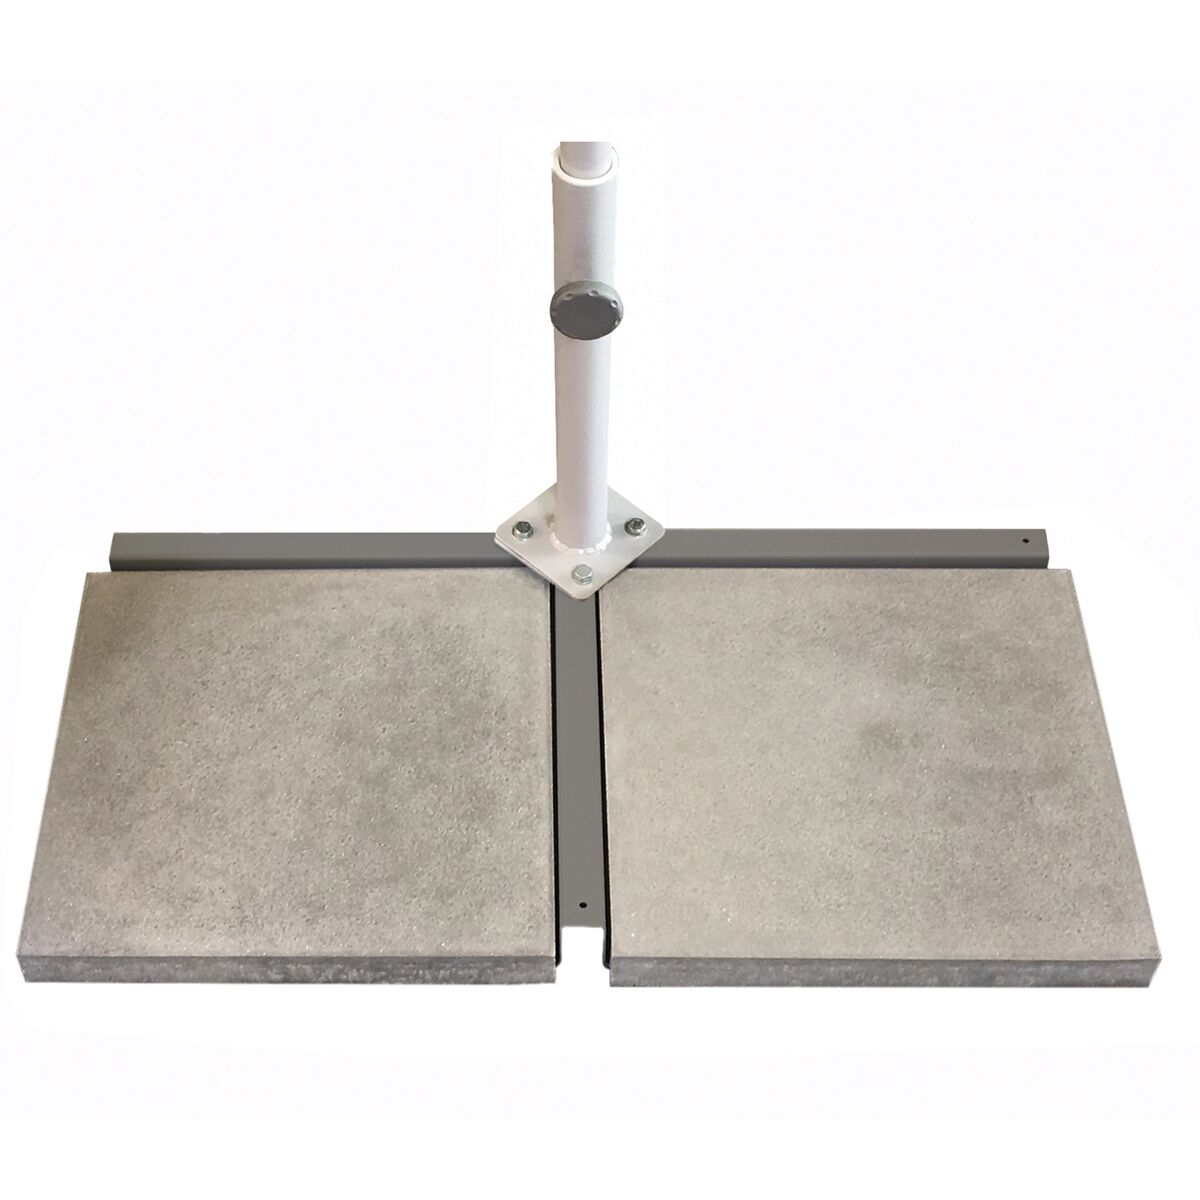 Max Green 30kg Glatz Flex Roof Cross Base with Support Tube & 2 Concrete Slabs